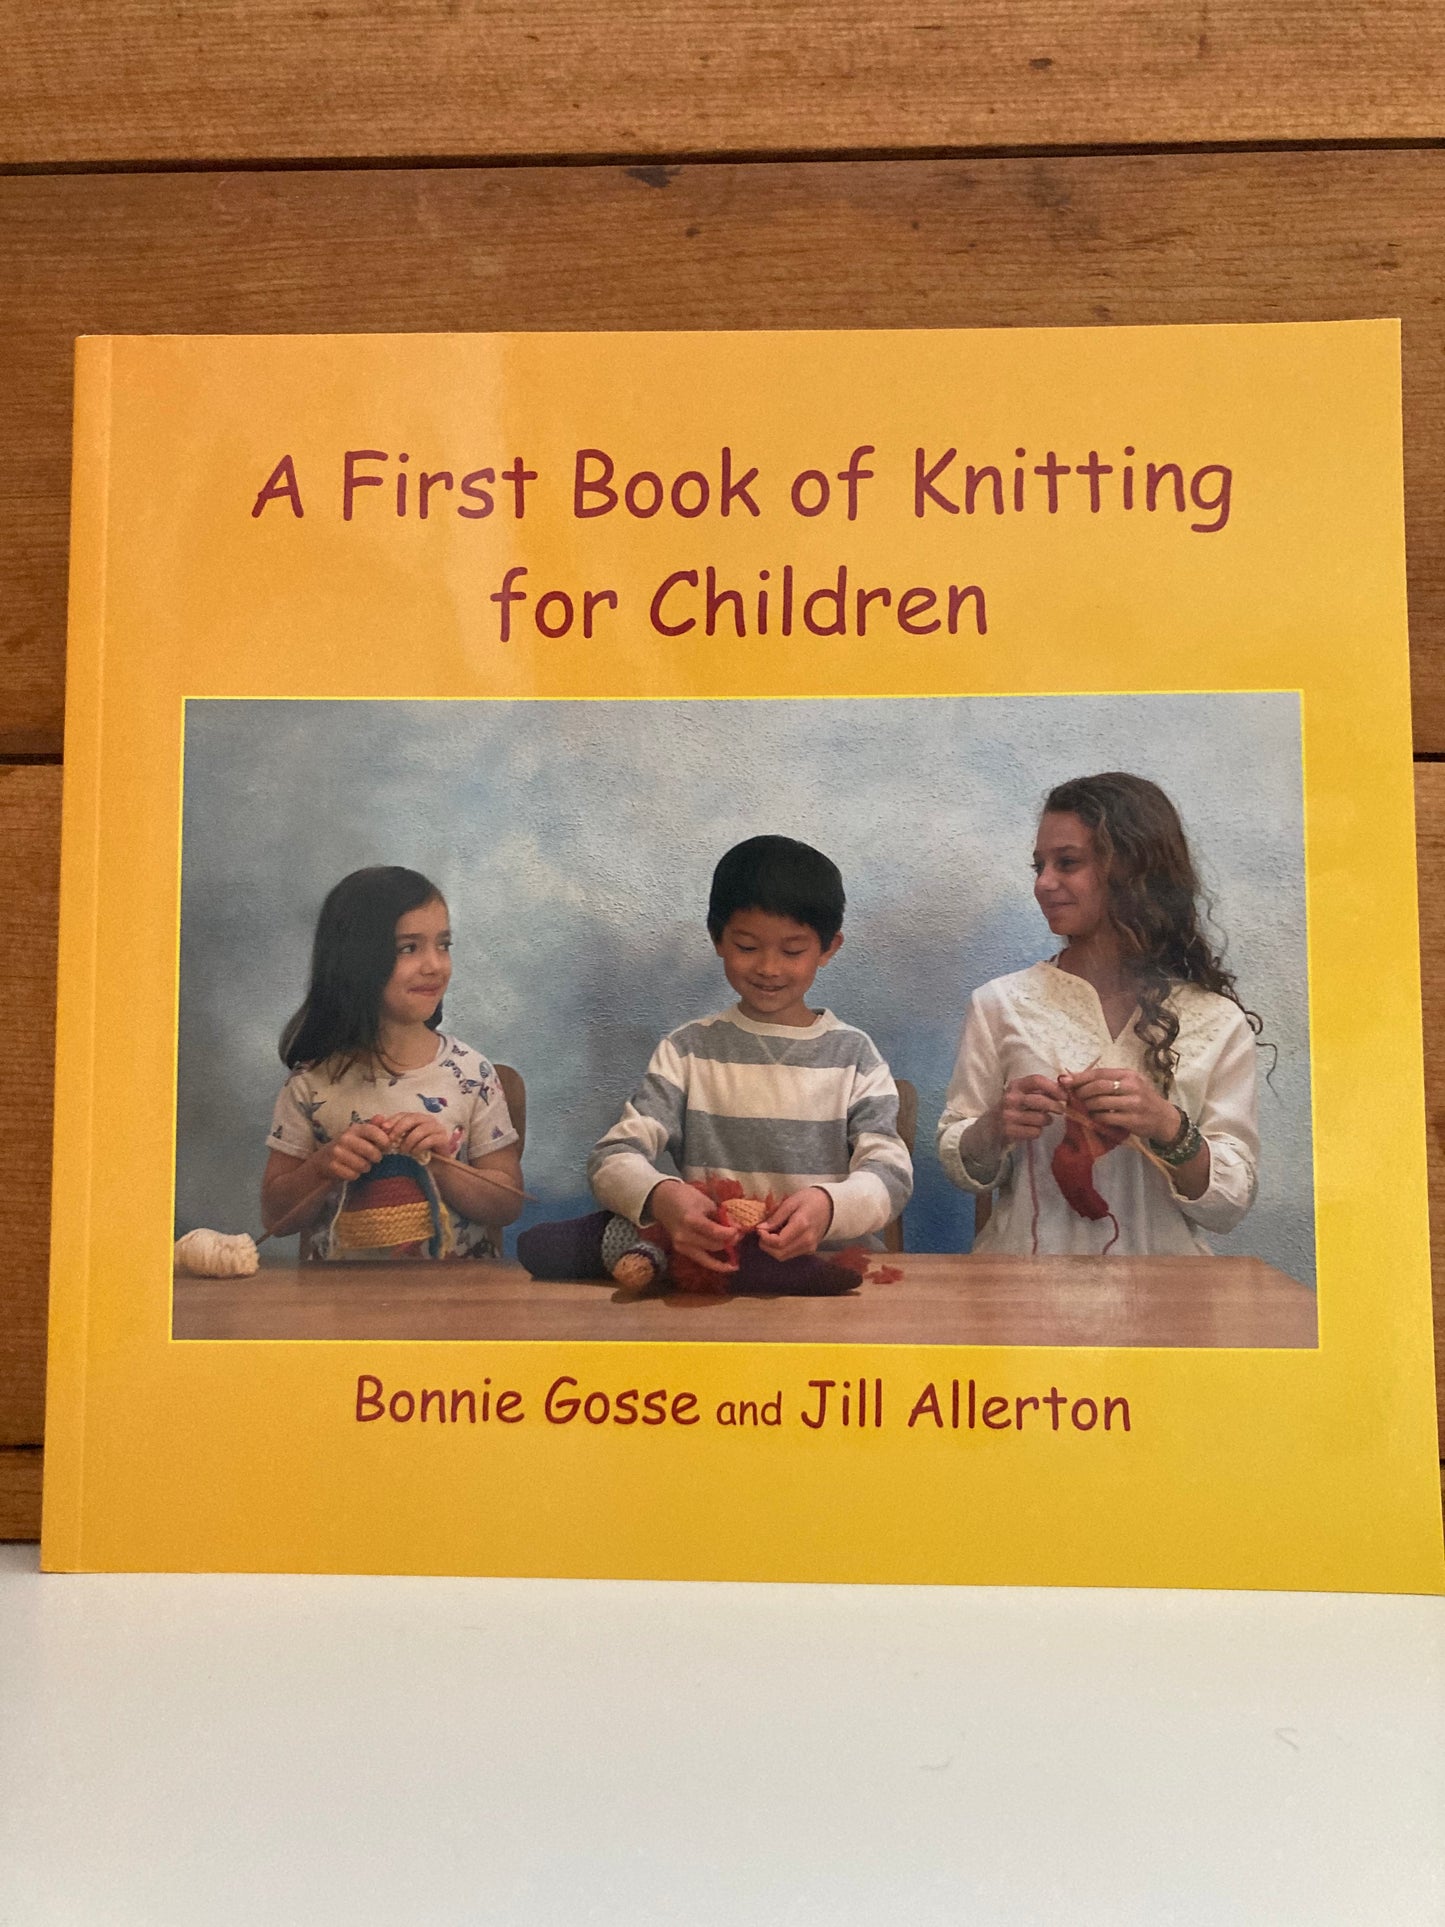 Crafting Resource Book - A FIRST BOOK OF KNITTING FOR CHILDREN